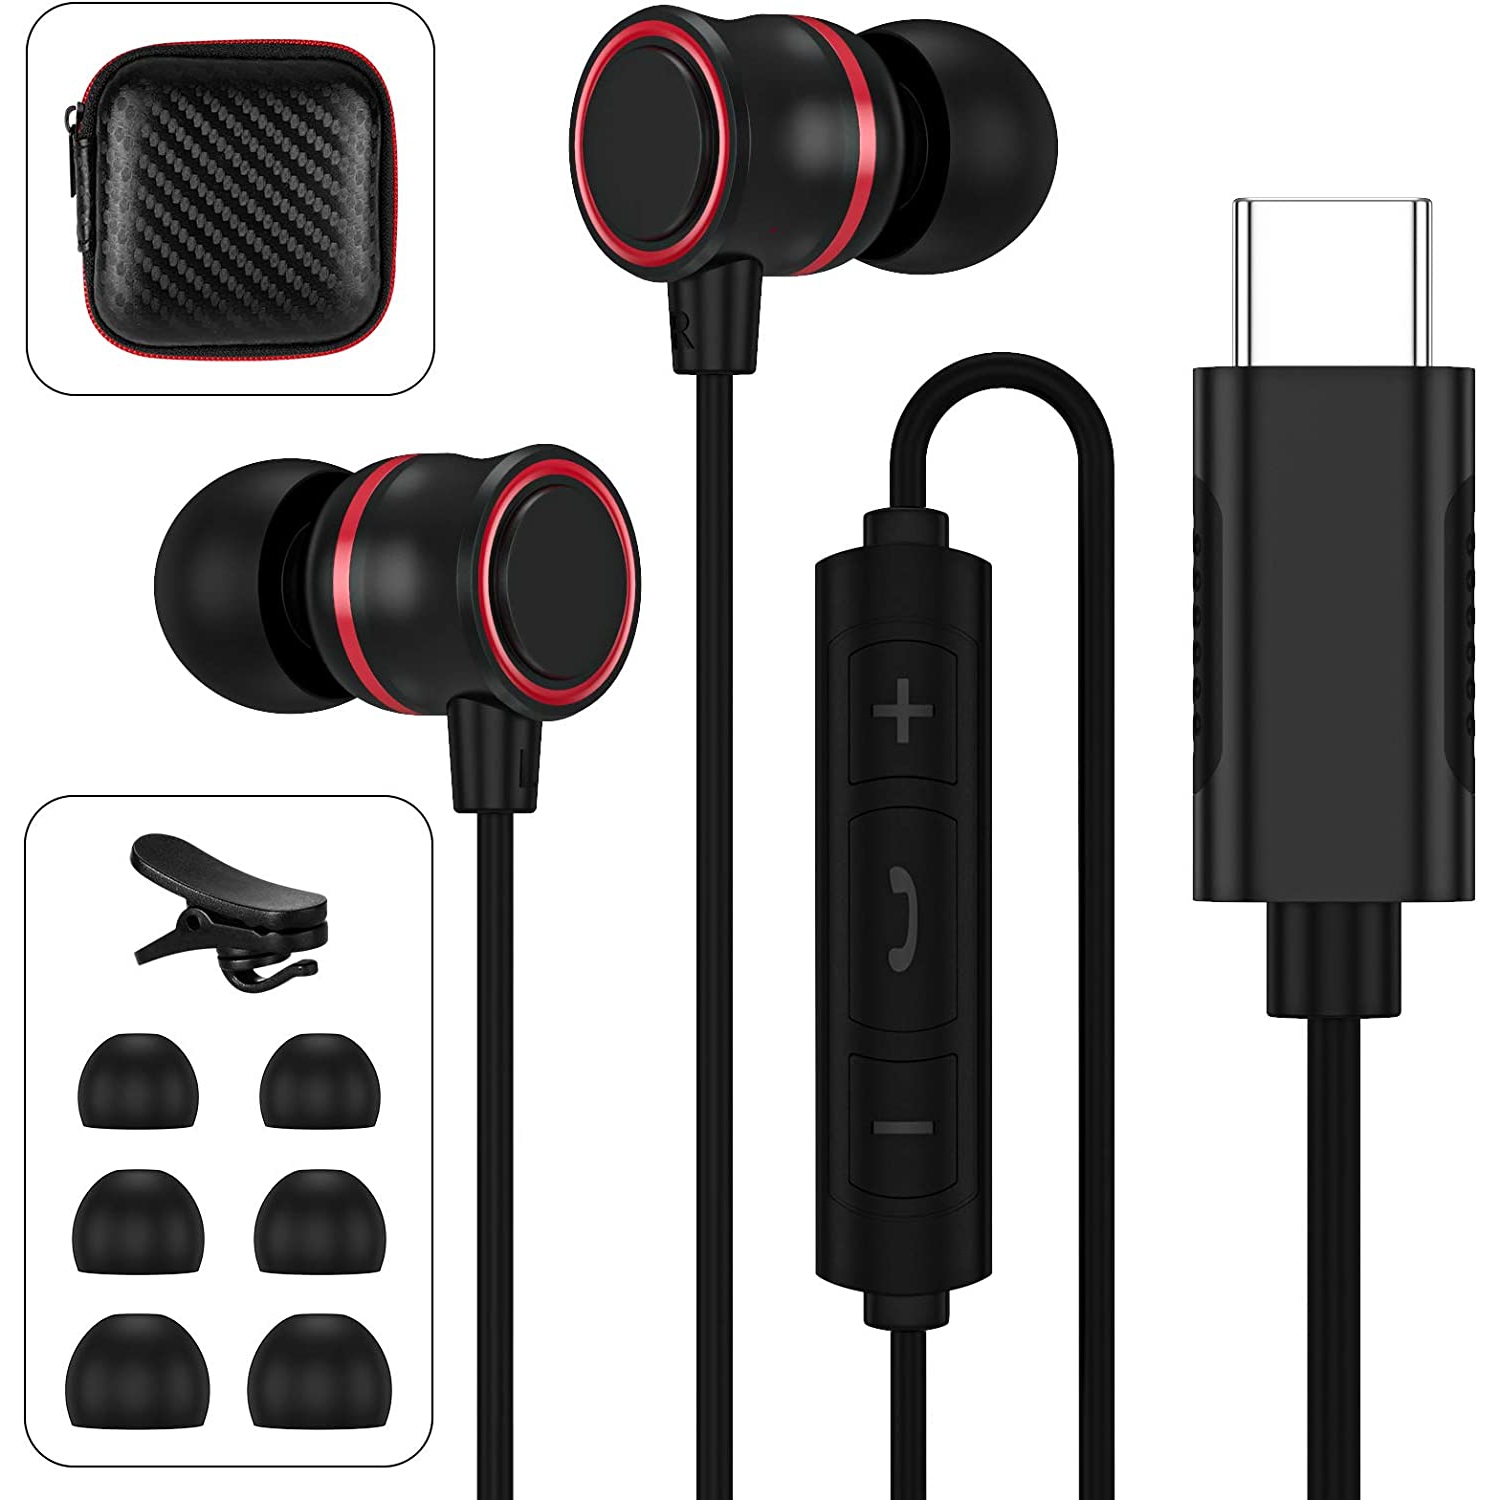 Dolaer USB C Earbuds for Samsung S20 FE In-Ear Headphones with Microphone Stereo Bass Noise Isolation USB C Earphones for iPad Pro Air4 Samsung S21 Plus Note 20 Ultra Google Pixel